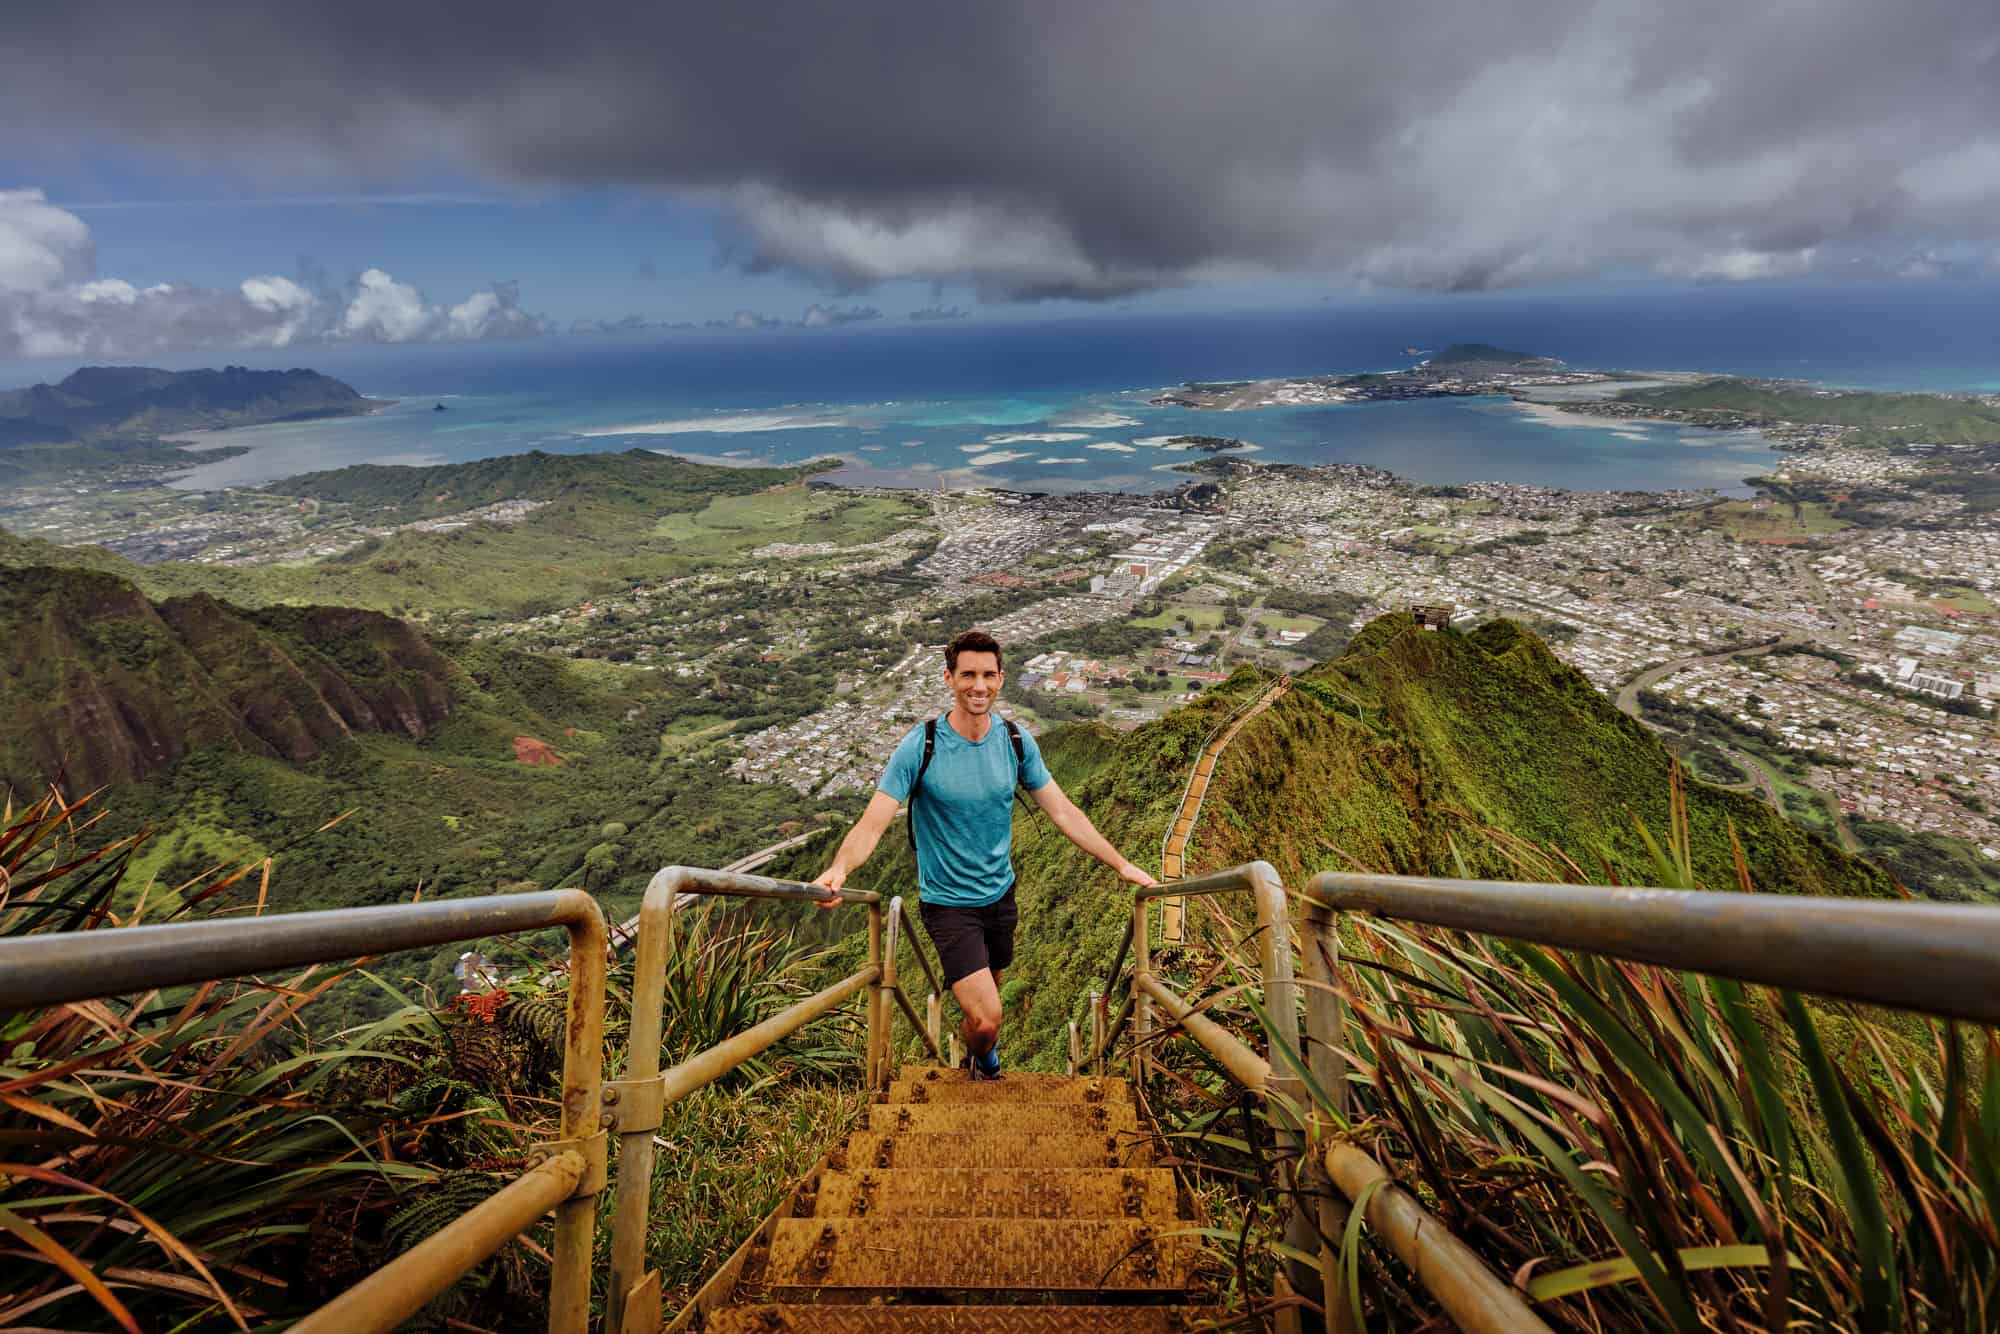 Hawaii's famed 'Stairway to Heaven' to be dismantled